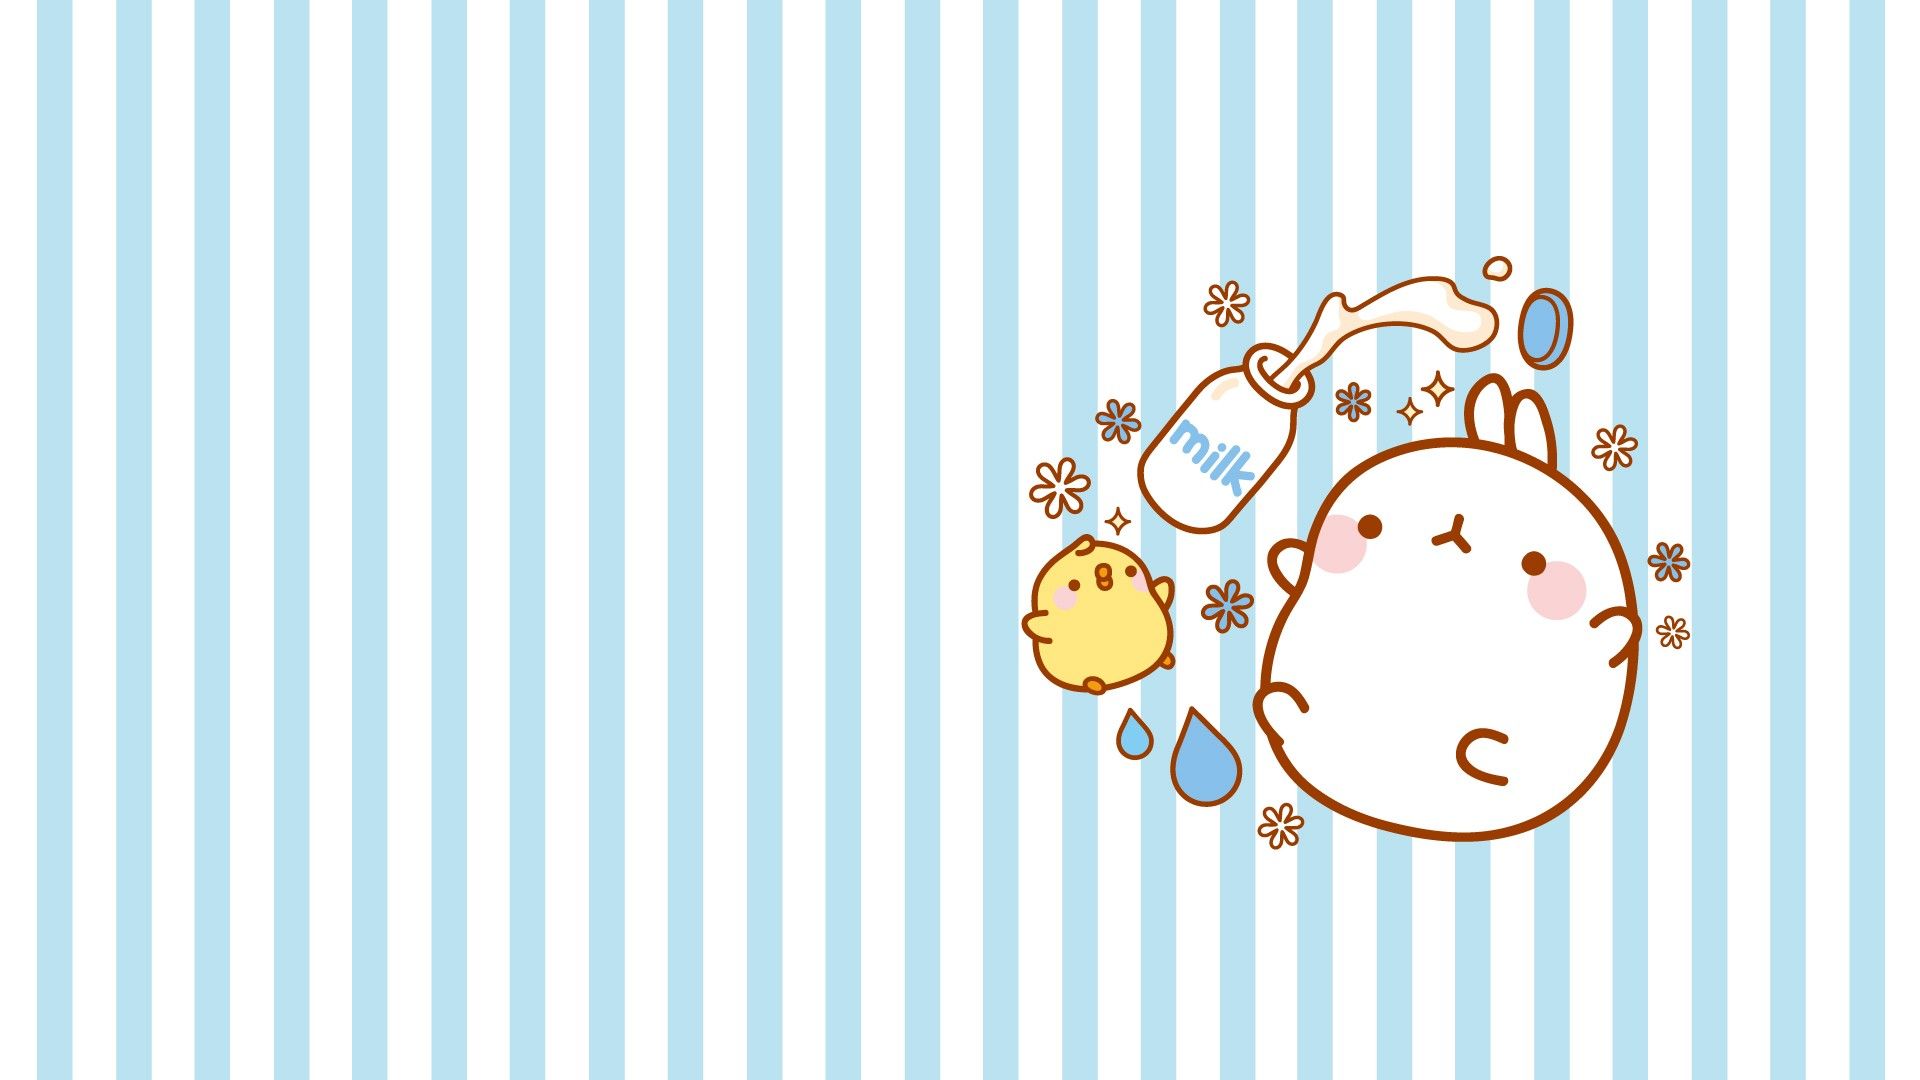 Cute For My LaptopWallpapers